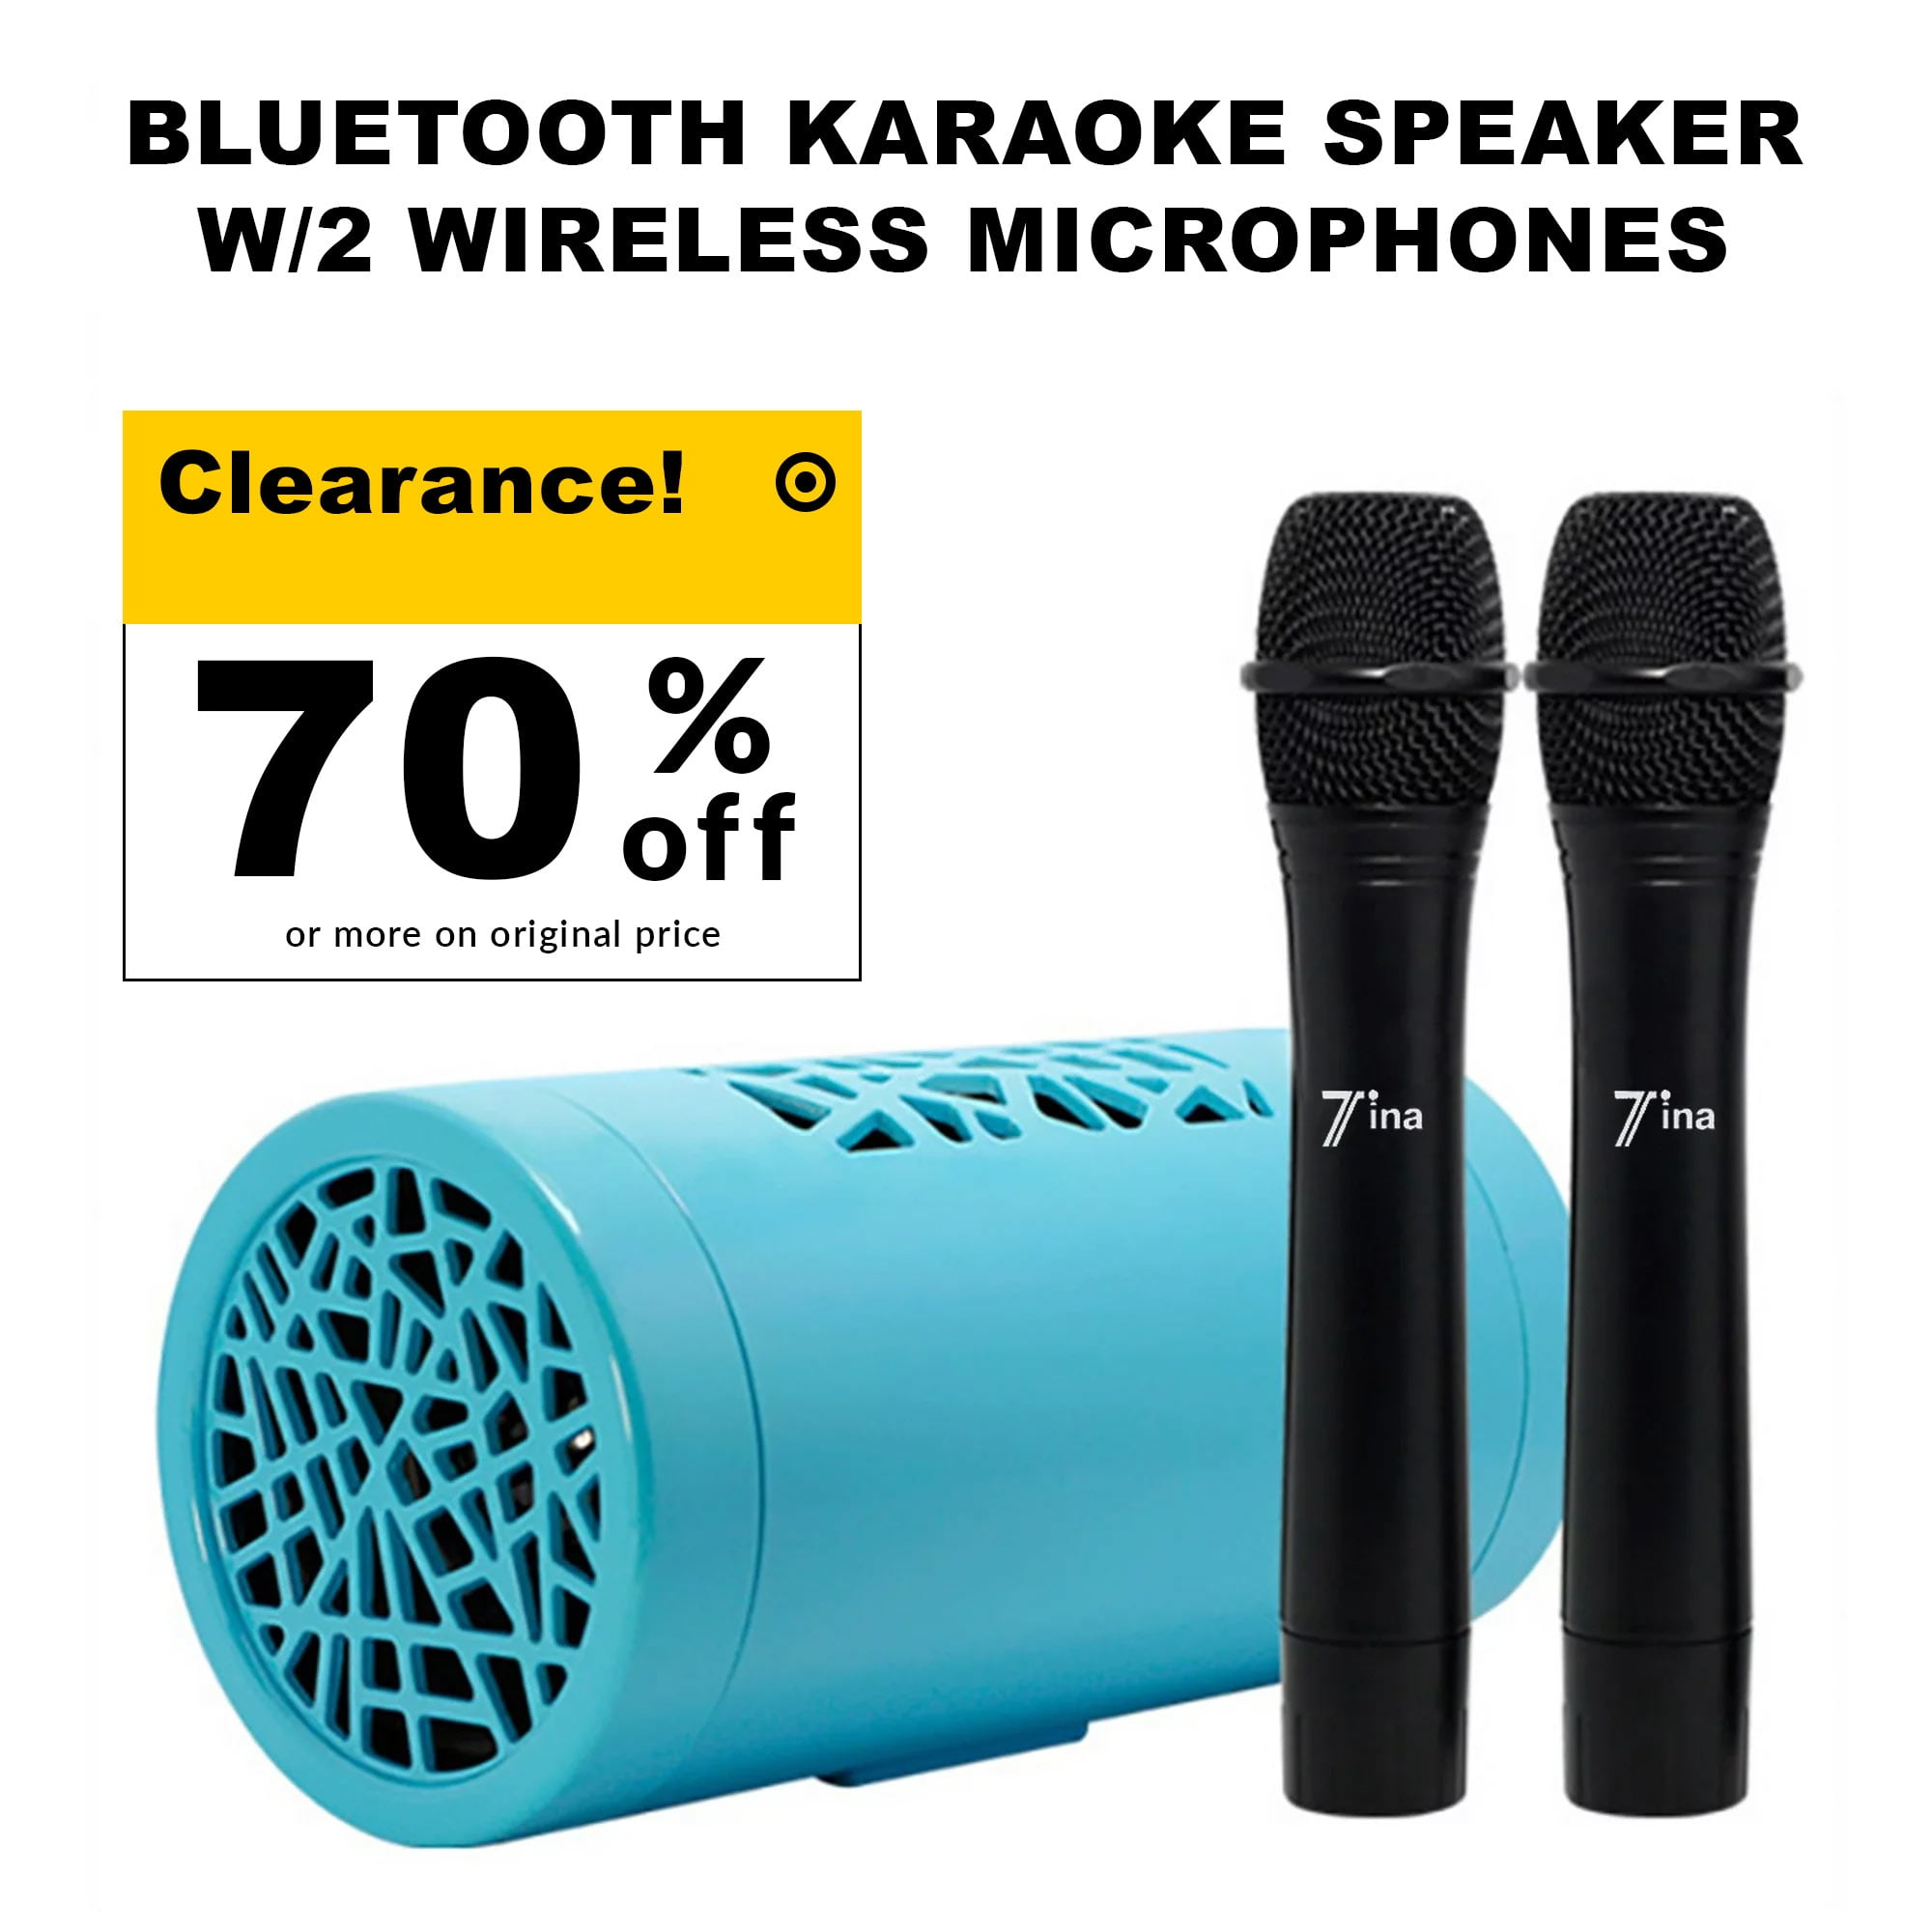 ST‑2028 Portable Karaoke Speaker System Bl-uetooth Karaoke Machine with 2  Mic, Wireless Microphones Bl-uetooth Connectivity for Wedding Party Lecture  Silver Black 